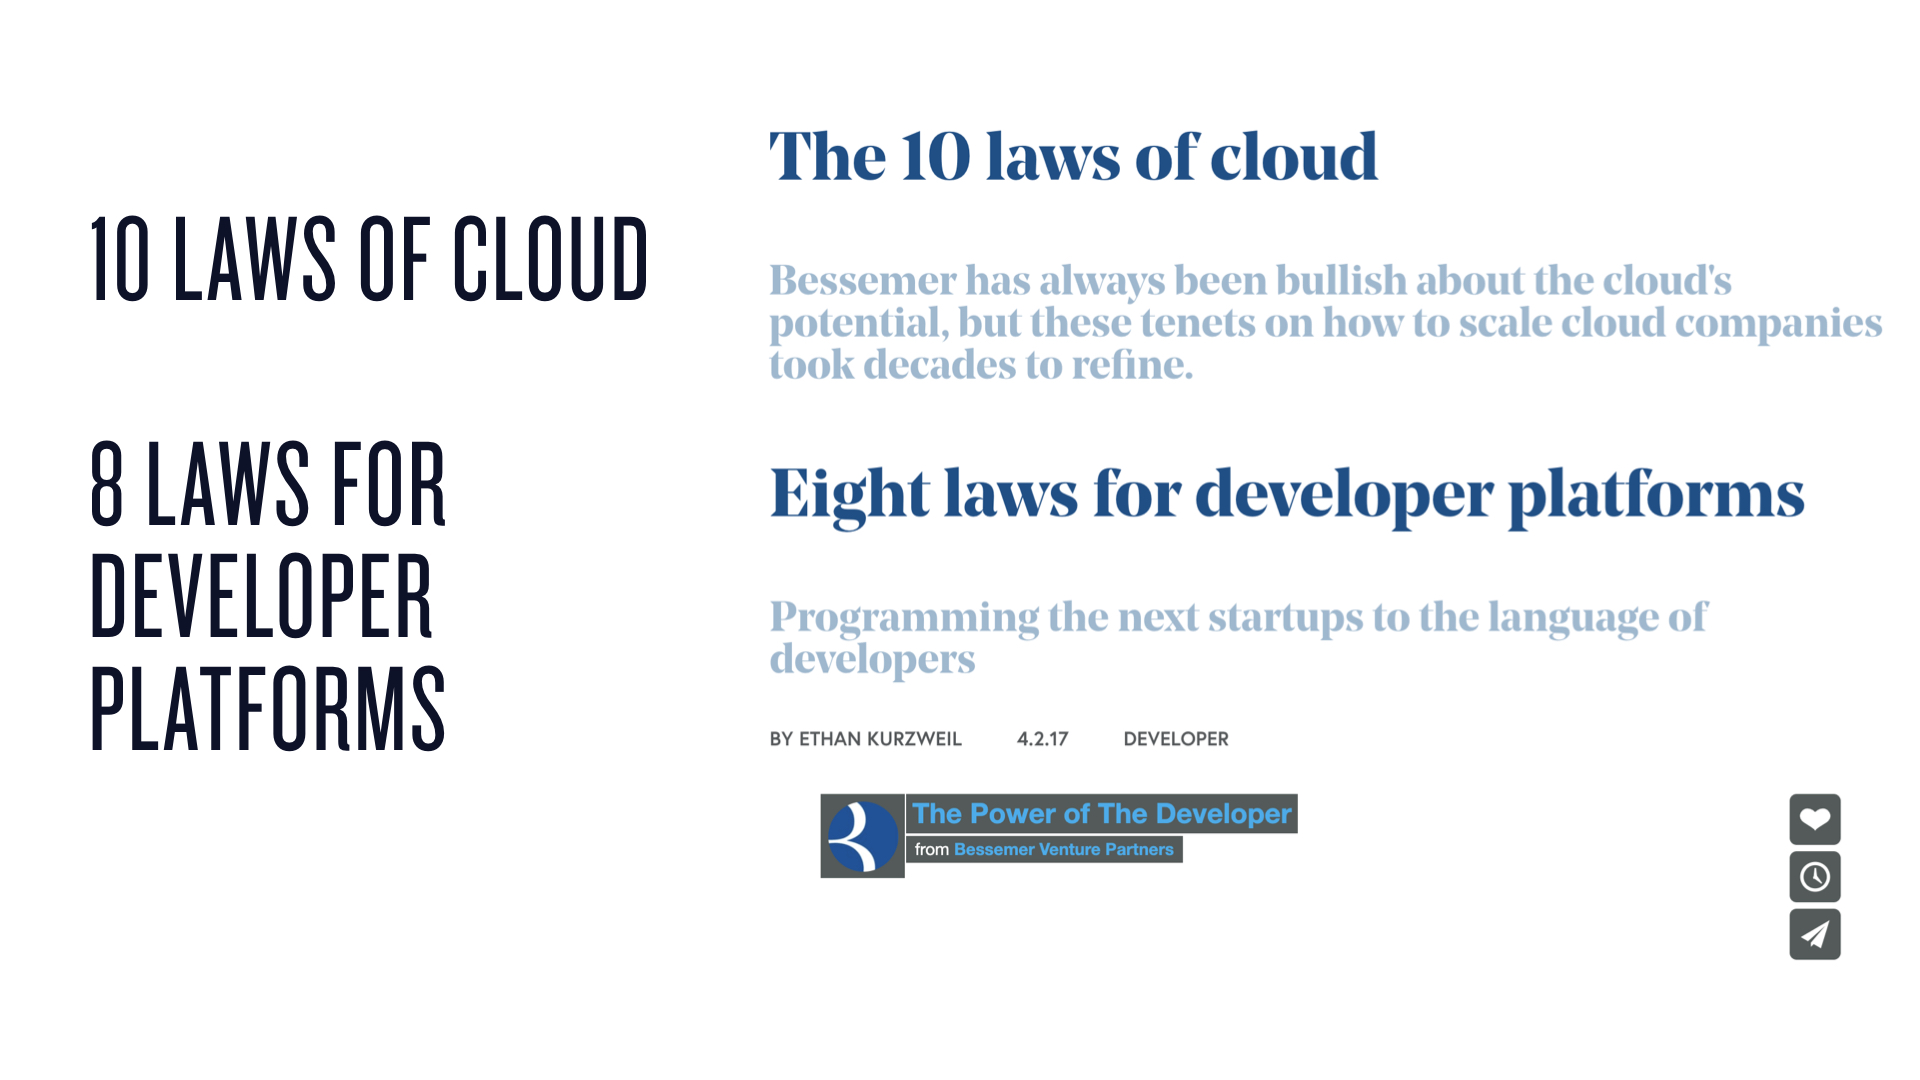 Bessemer's 10 Laws of Cloud Computing and developer platform laws are fantastic foundational reading.